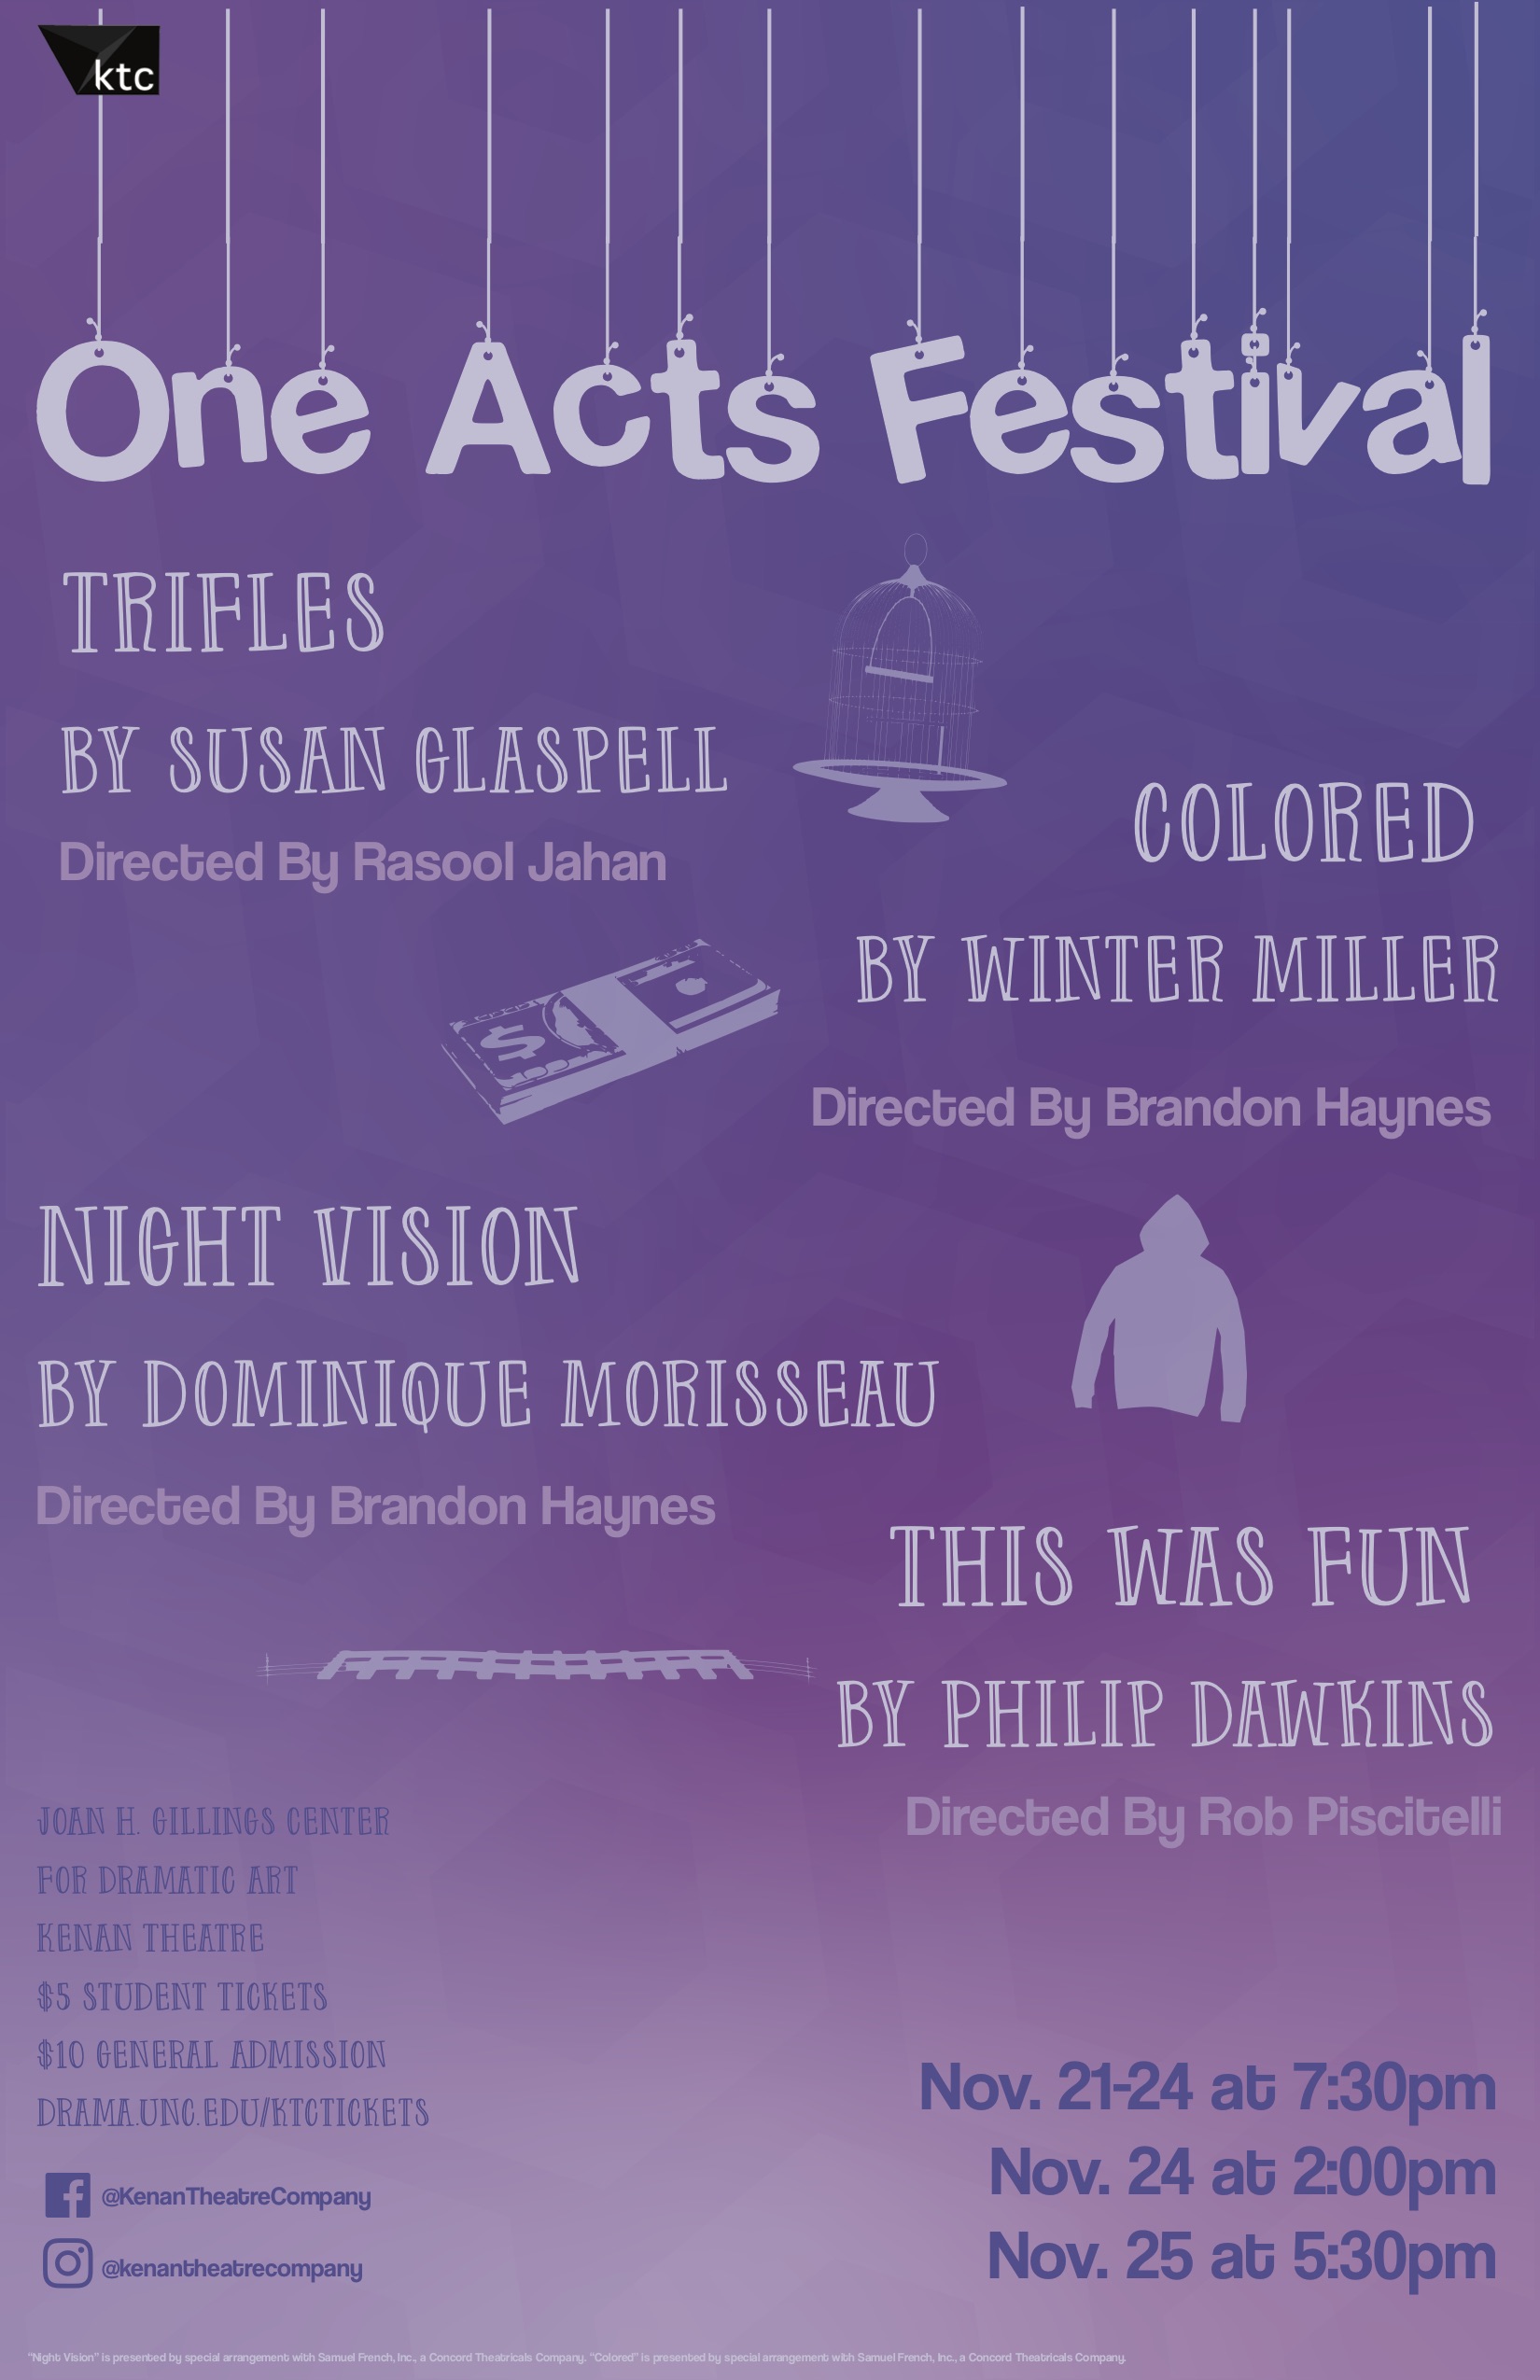 One-Act Festival